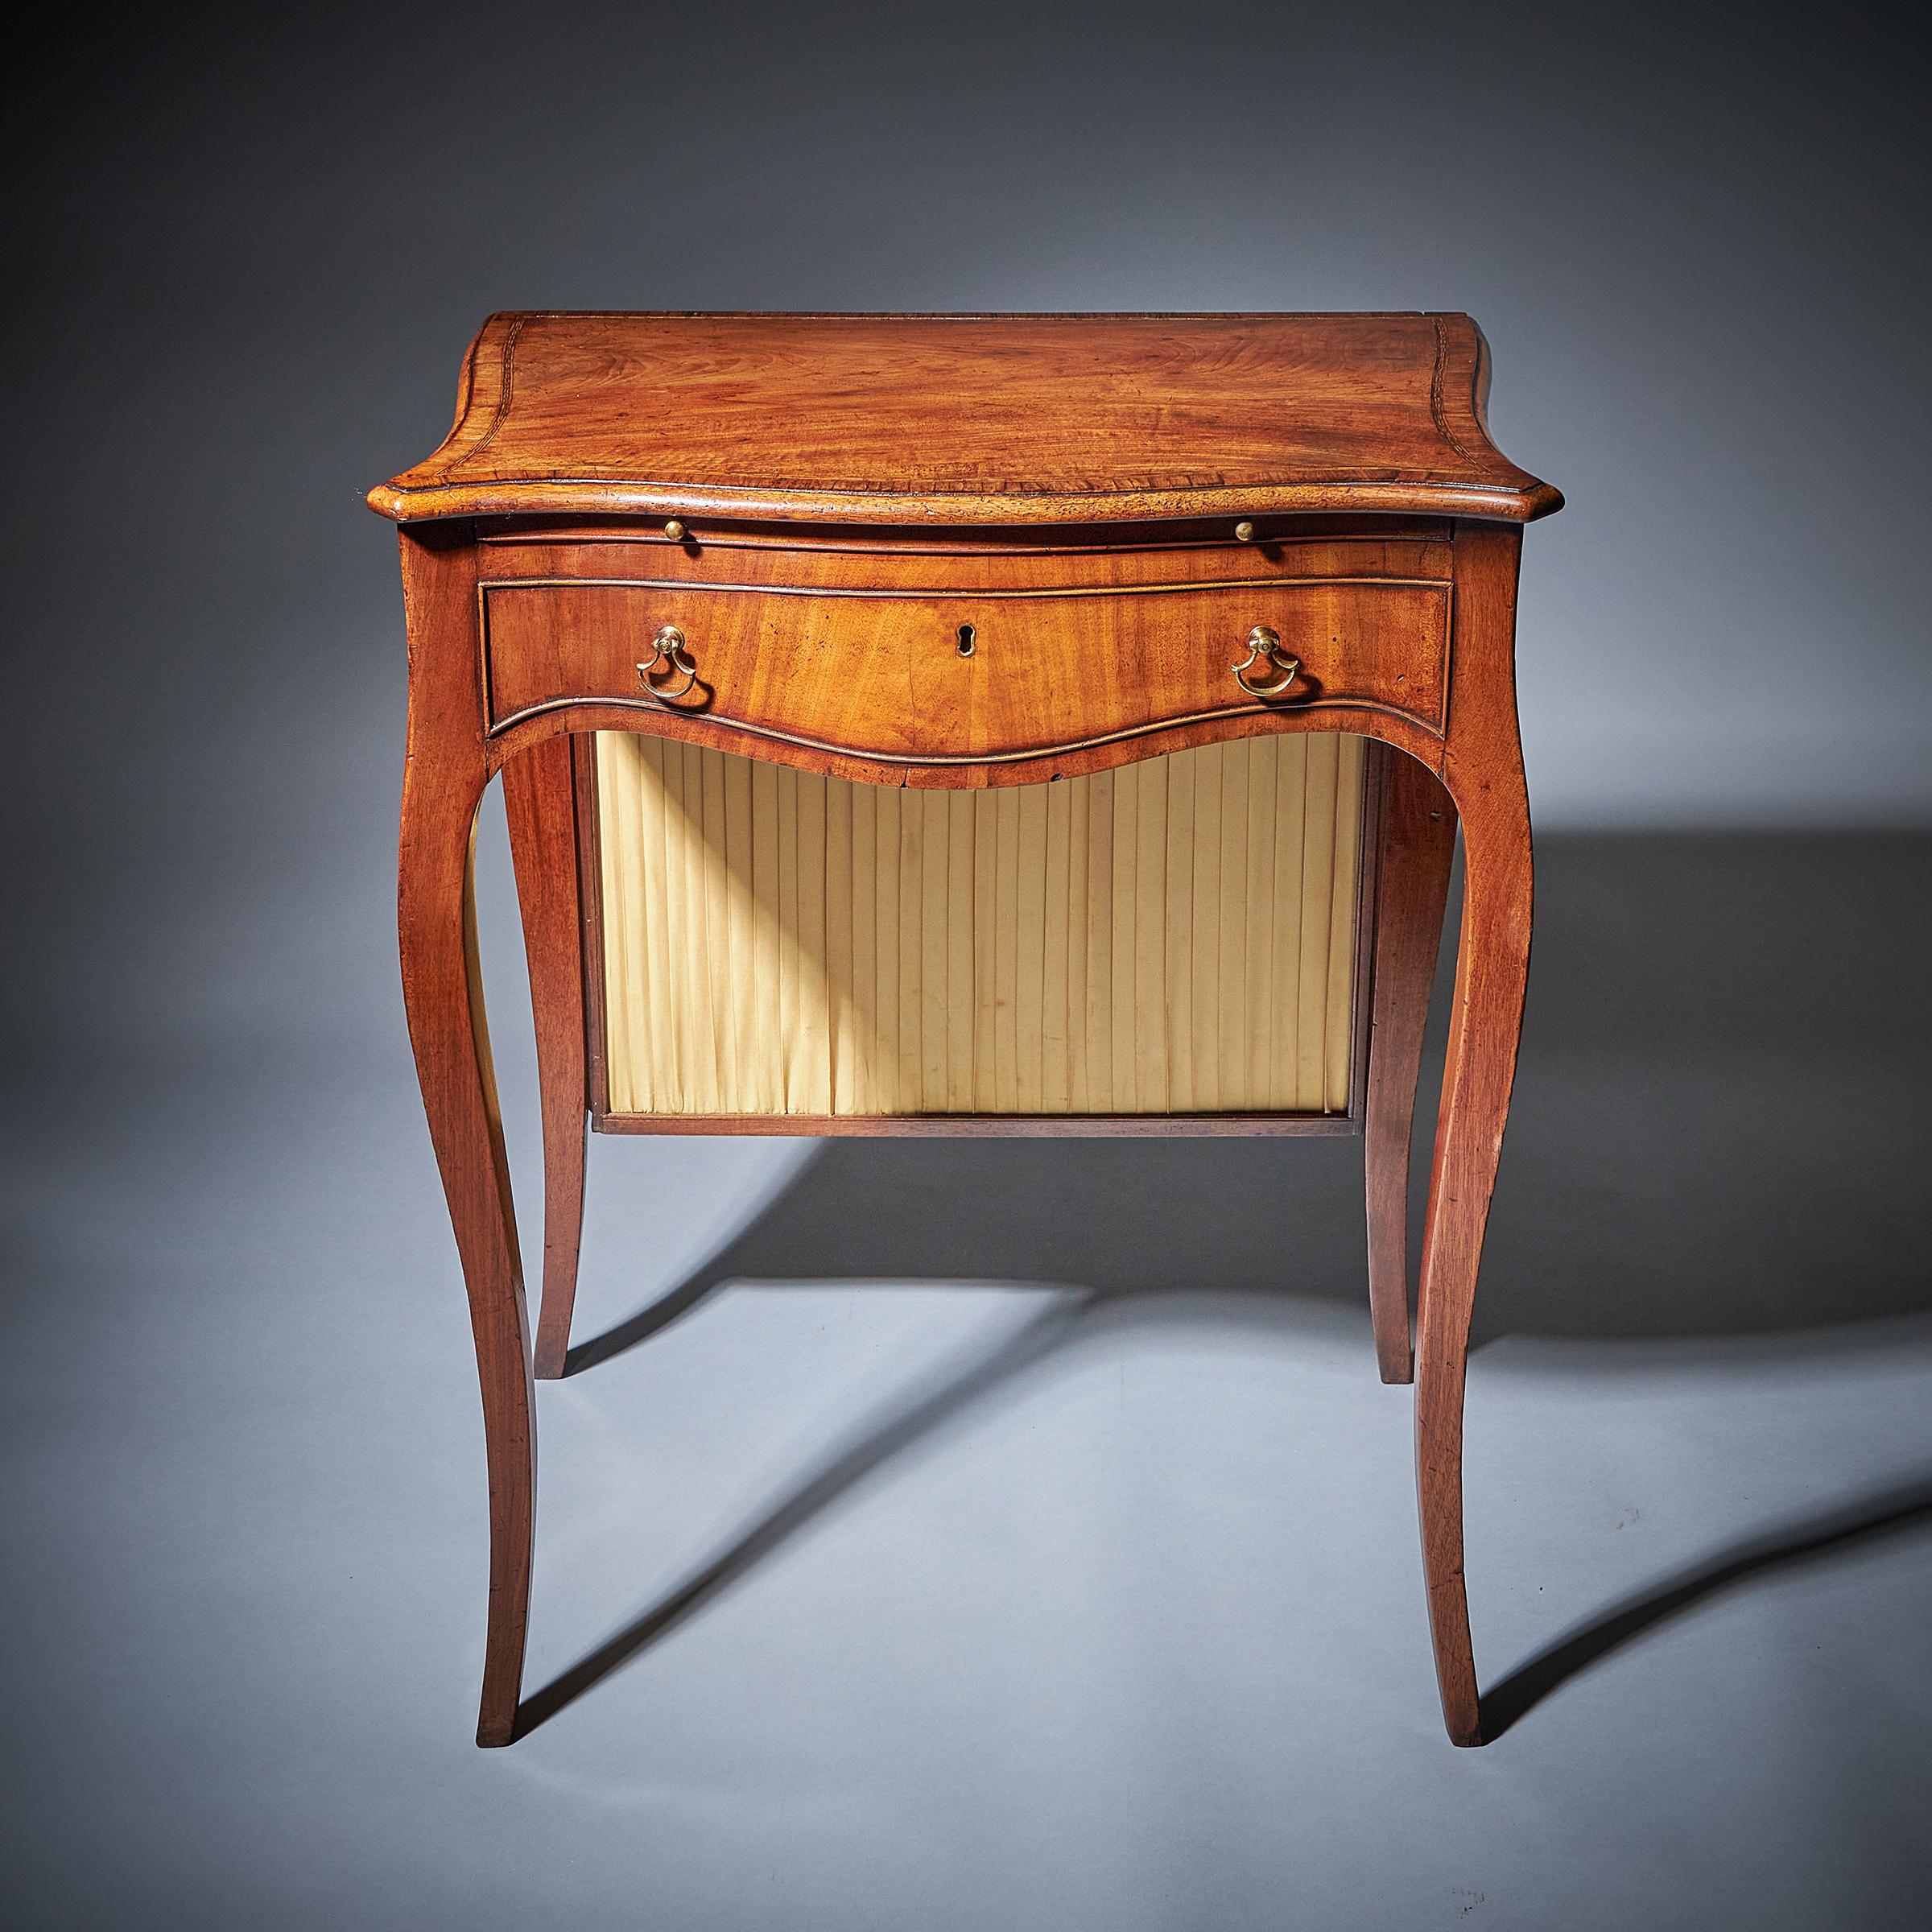 English 18th Century George III Chippendale Mahogany and Tulipwood Writing Table, C, 1770